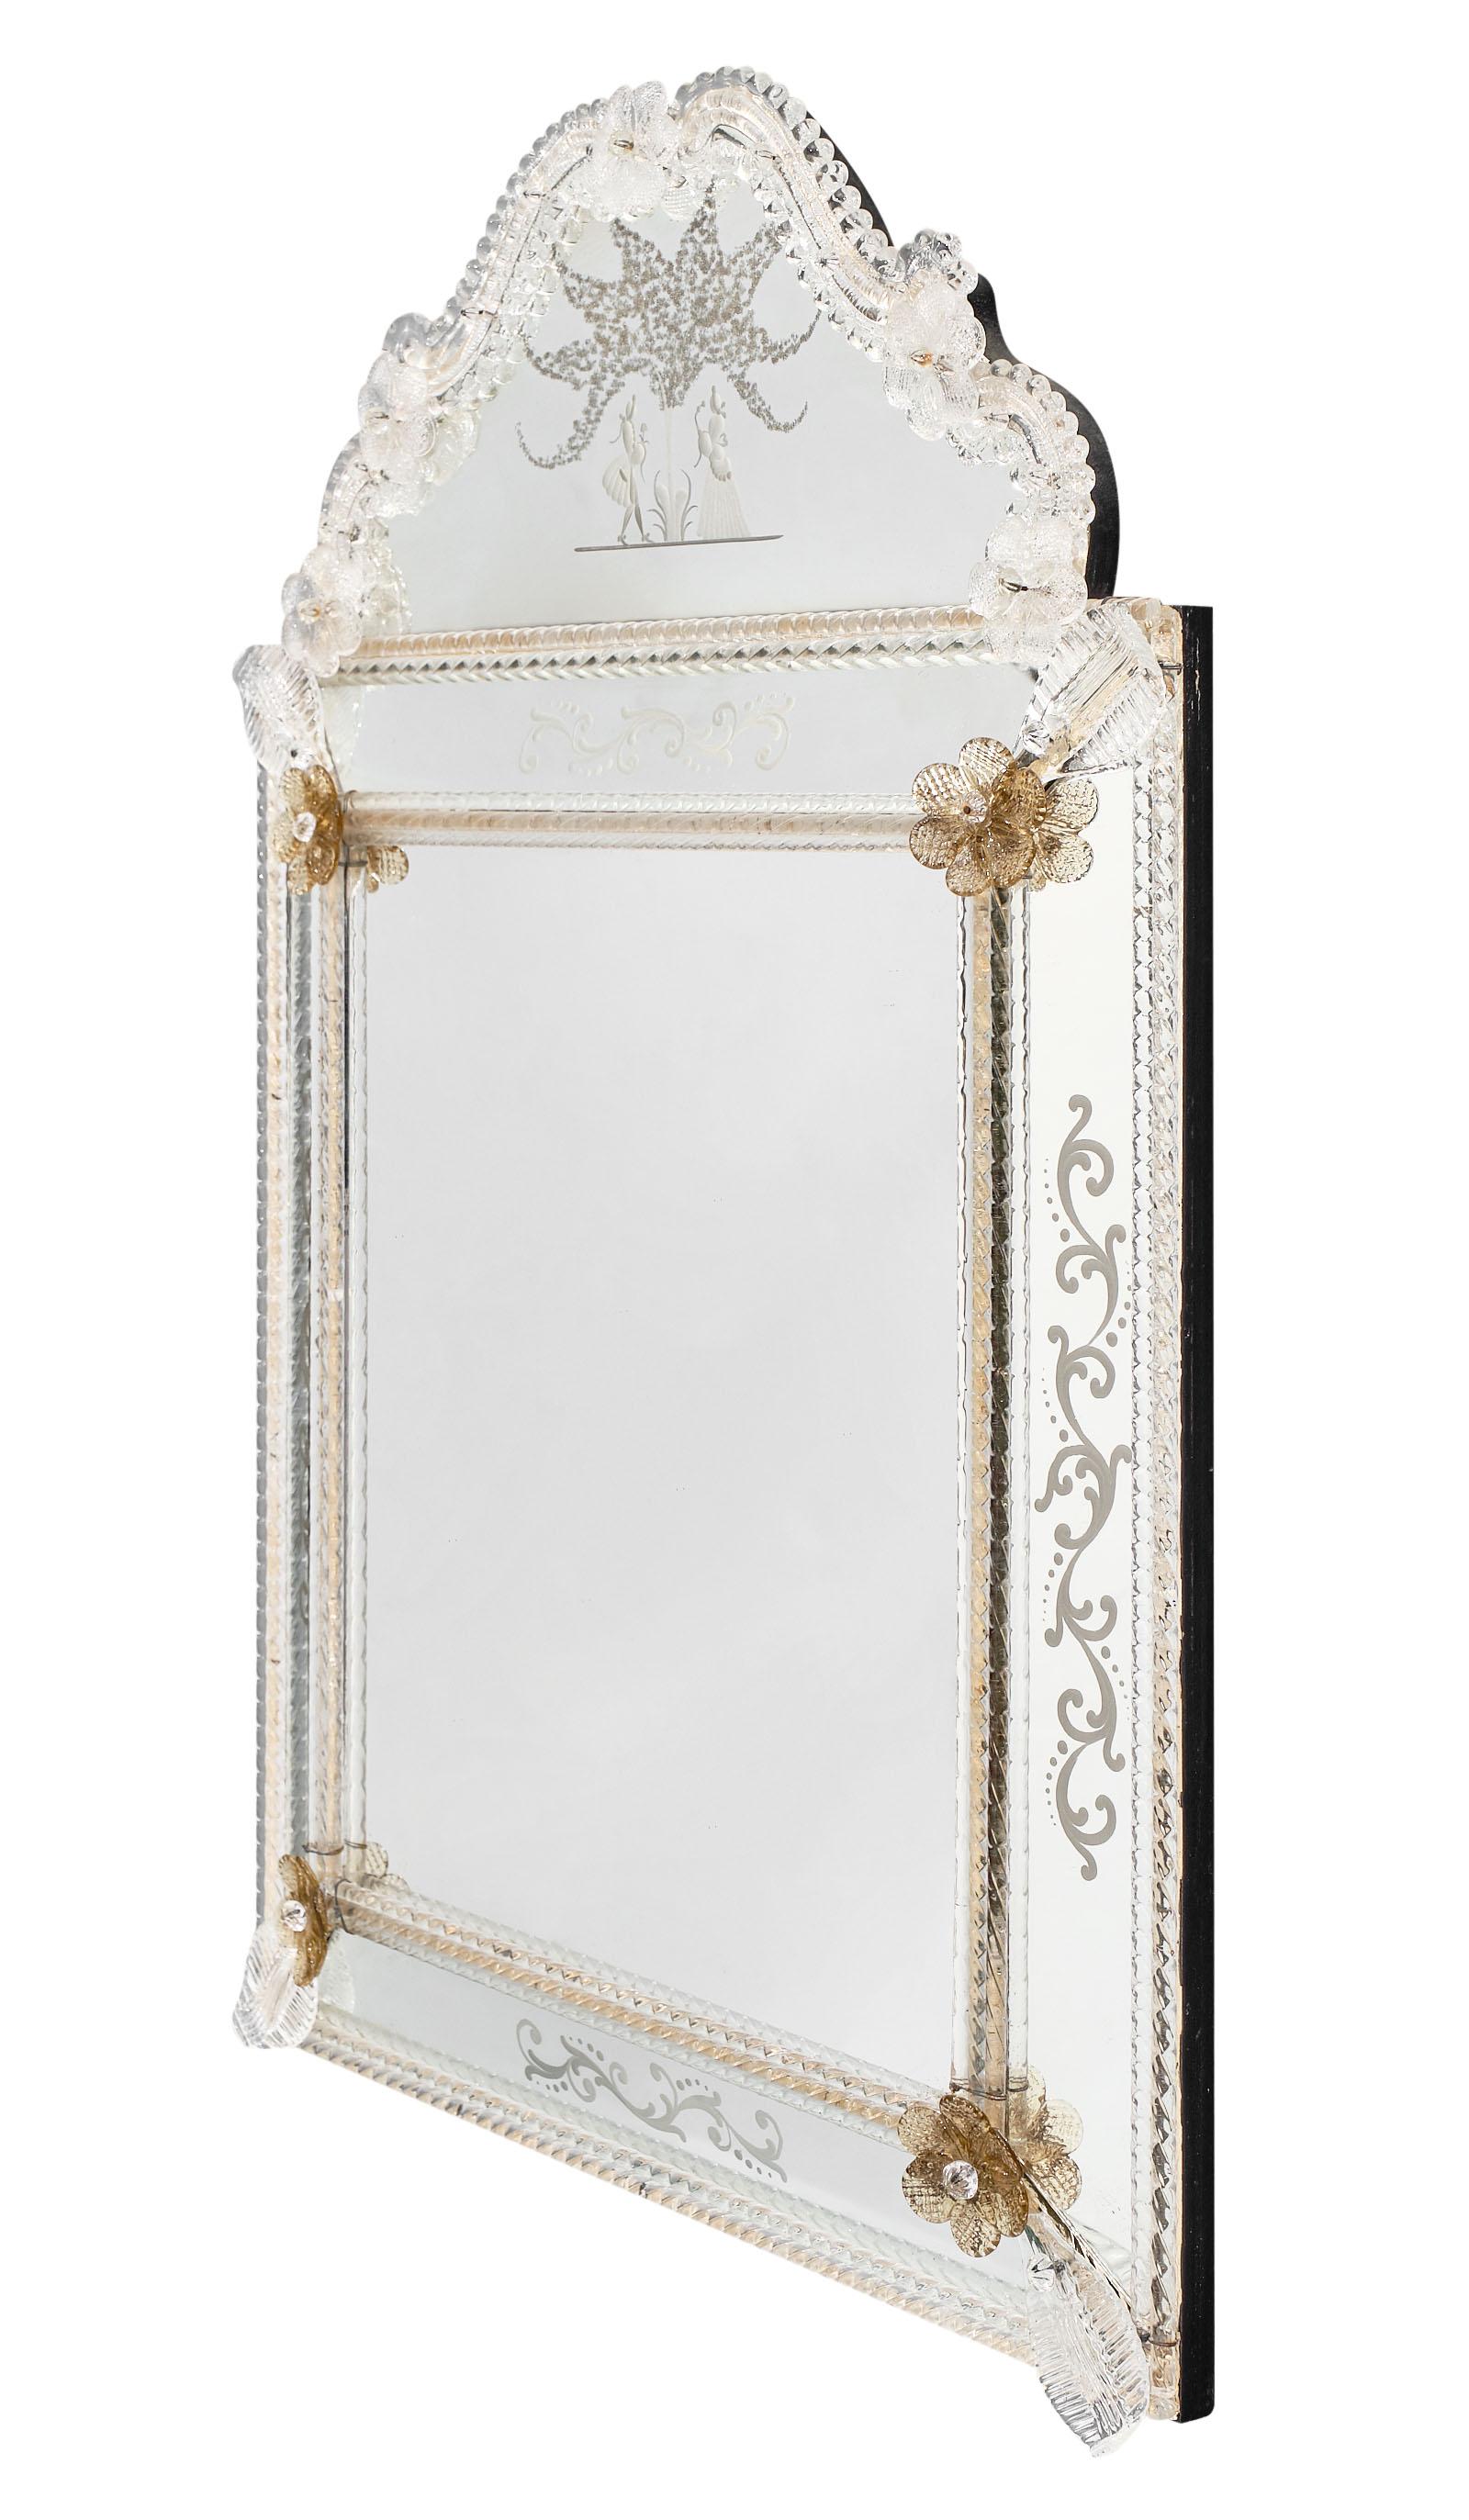 Antique Venetian mirror with pieces of compartmental mirrors chiseled with floral decor. A romantic scene can be found on the fronton. We love the detail of this striking and lovely piece.